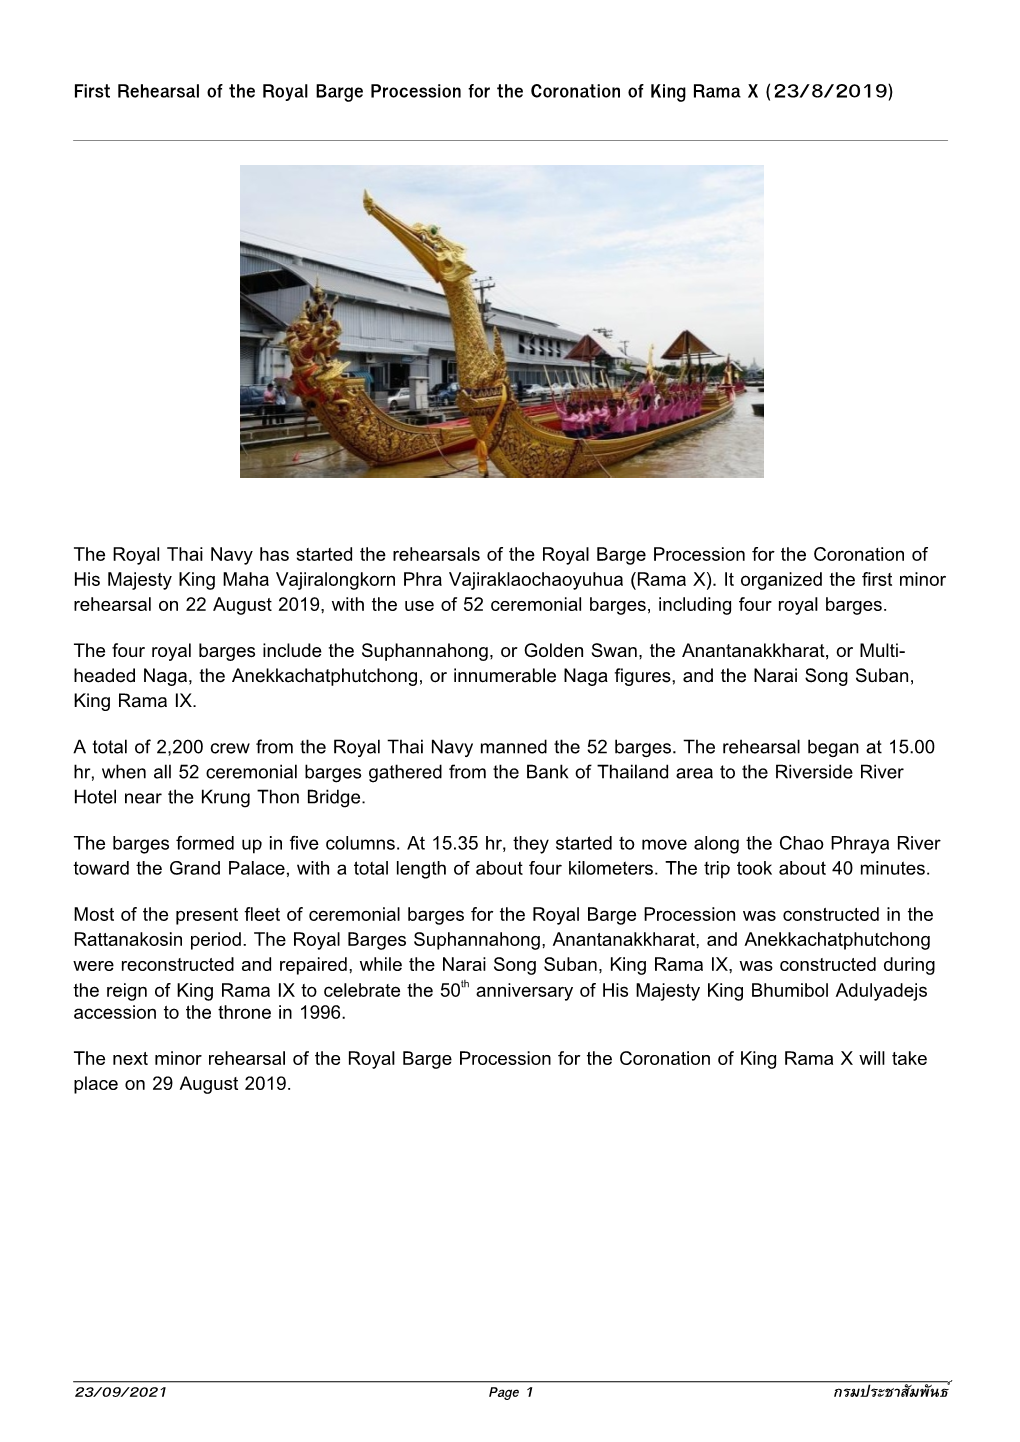 First Rehearsal of the Royal Barge Procession for the Coronation of King Rama X (23/8/2019)